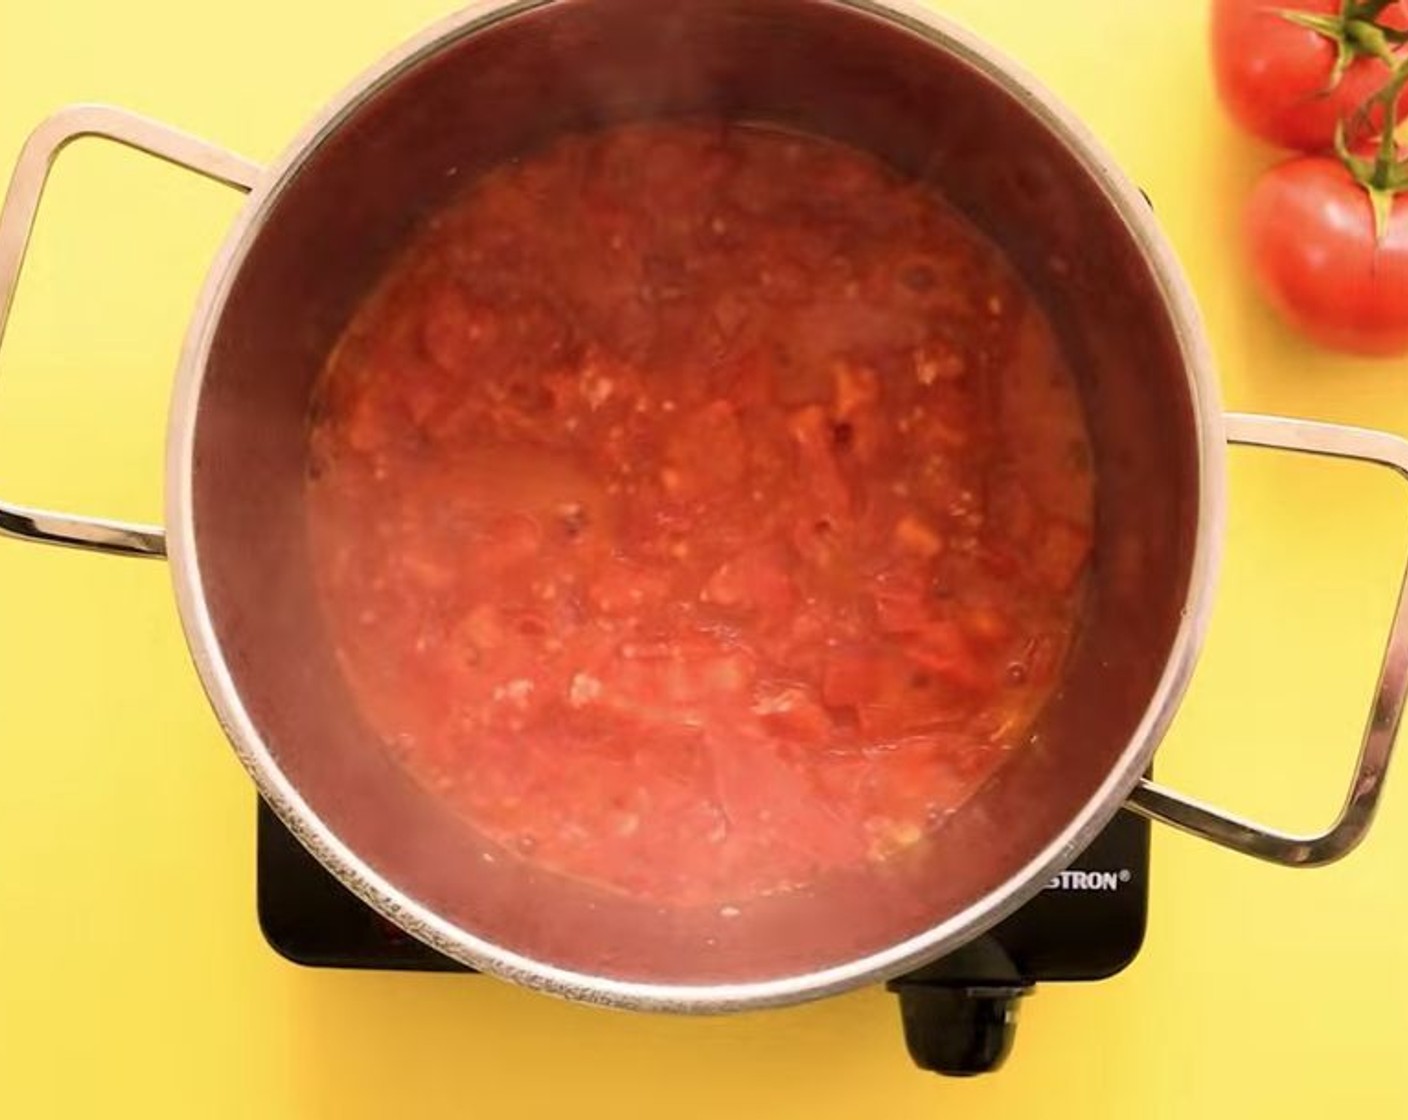 step 2 Add Tomatoes (5) and stir well. Allow to simmer, uncovered, about 25 minutes, stirring often, until mixture has thickened slightly.